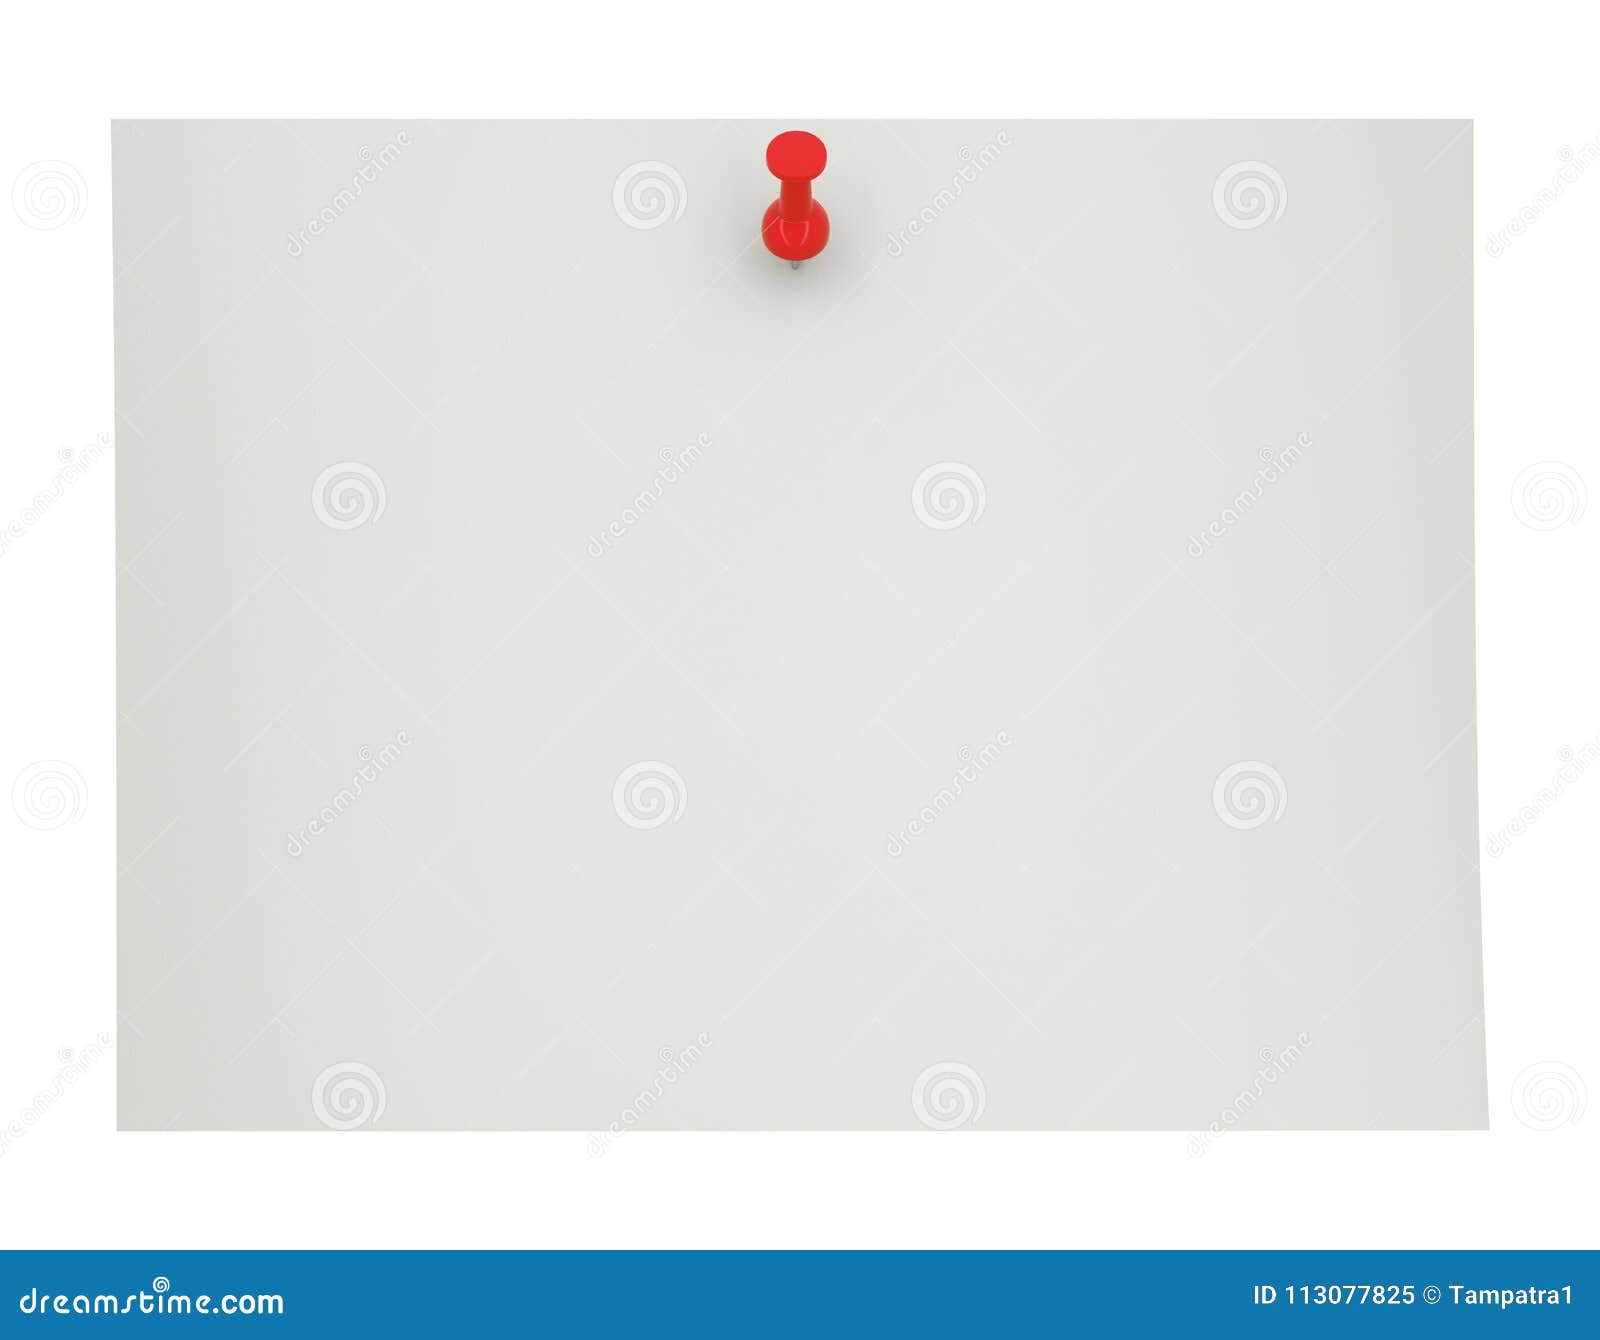 Download Red Push Pin, Thumbtack On Blank Paper, 3d Illustration ...